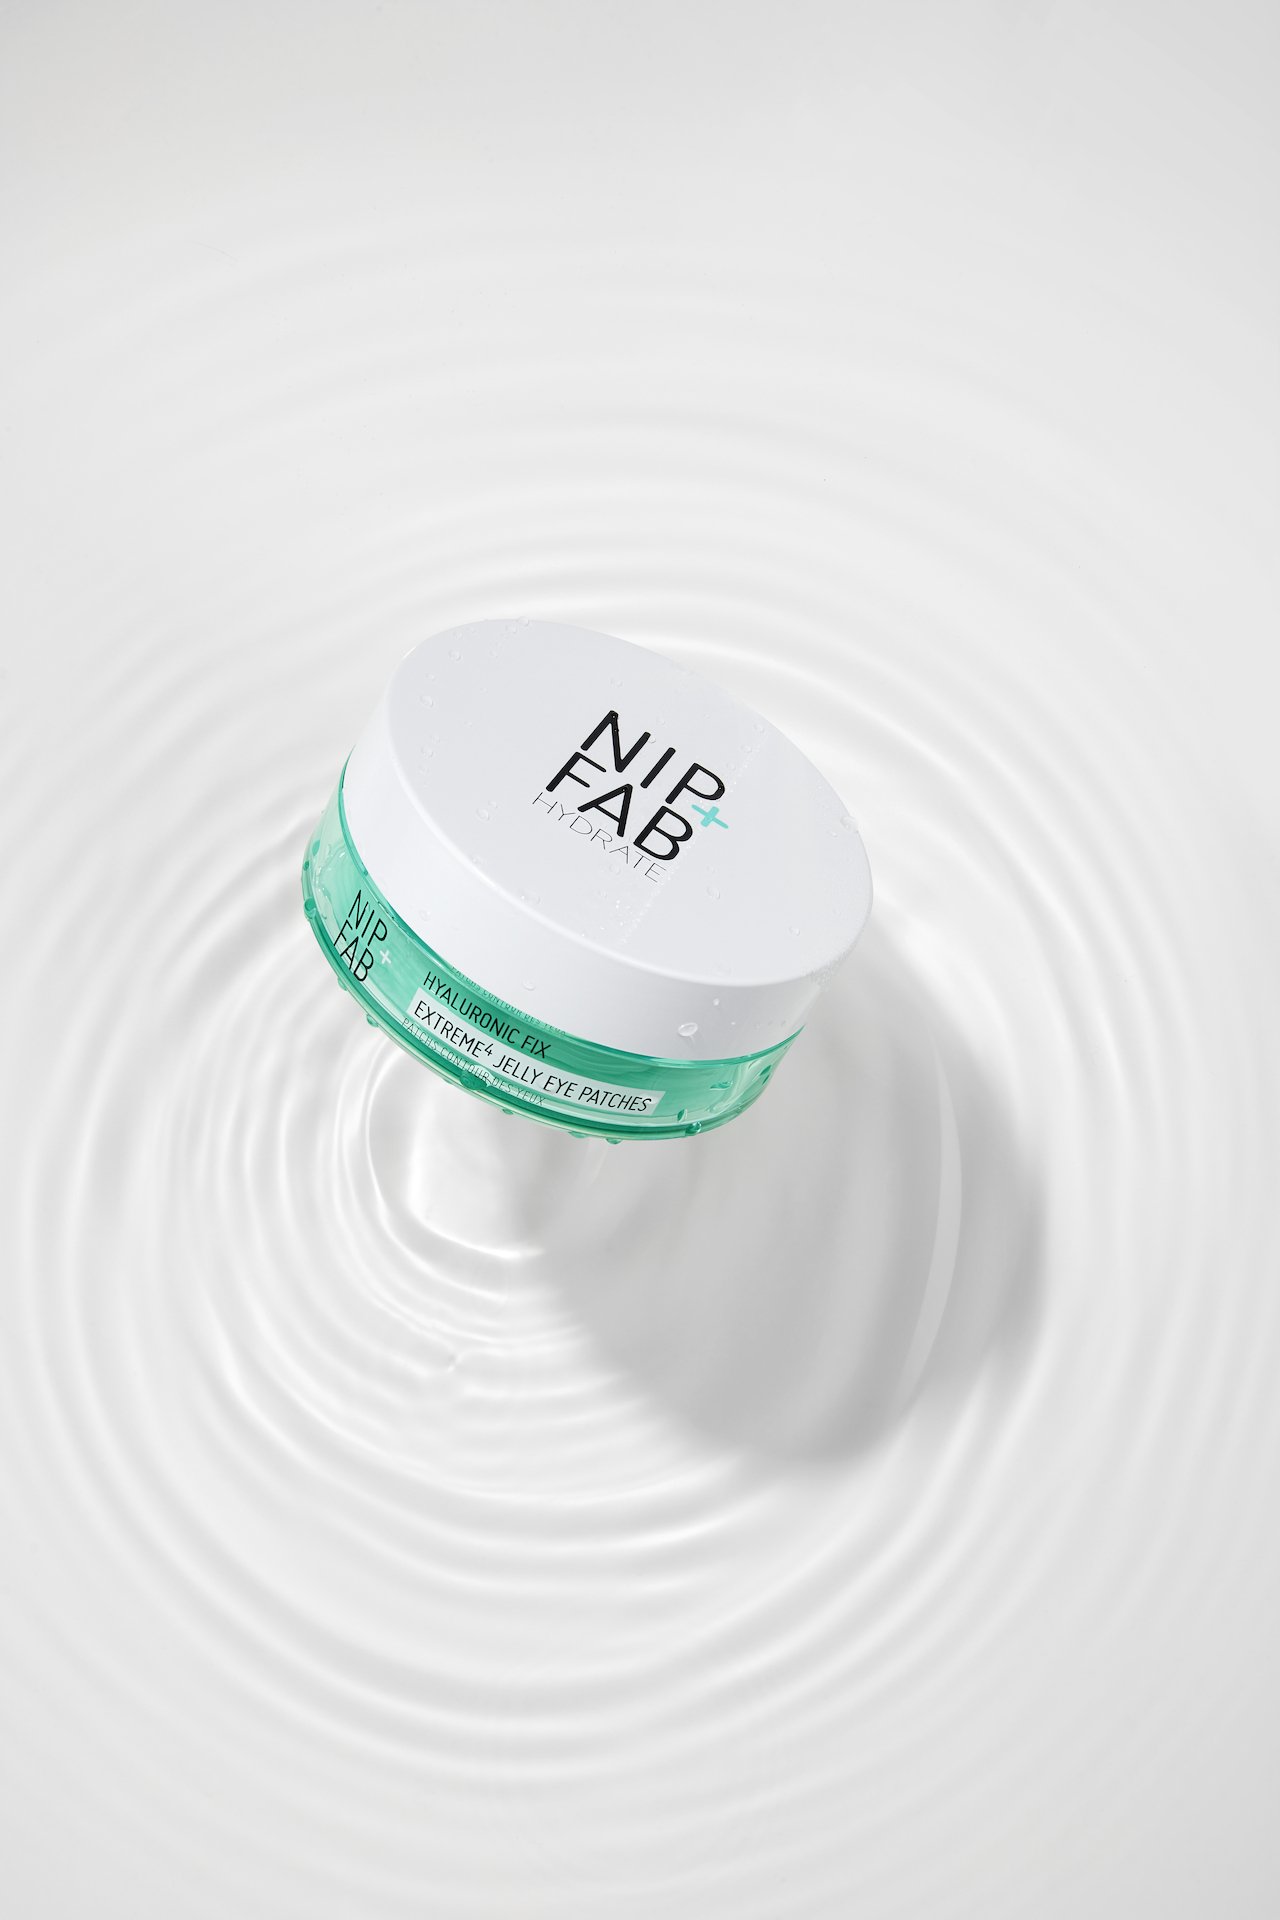 NIP+FAB Hyaluronic Fix Extreme4 Jelly Eye Patches 20 par